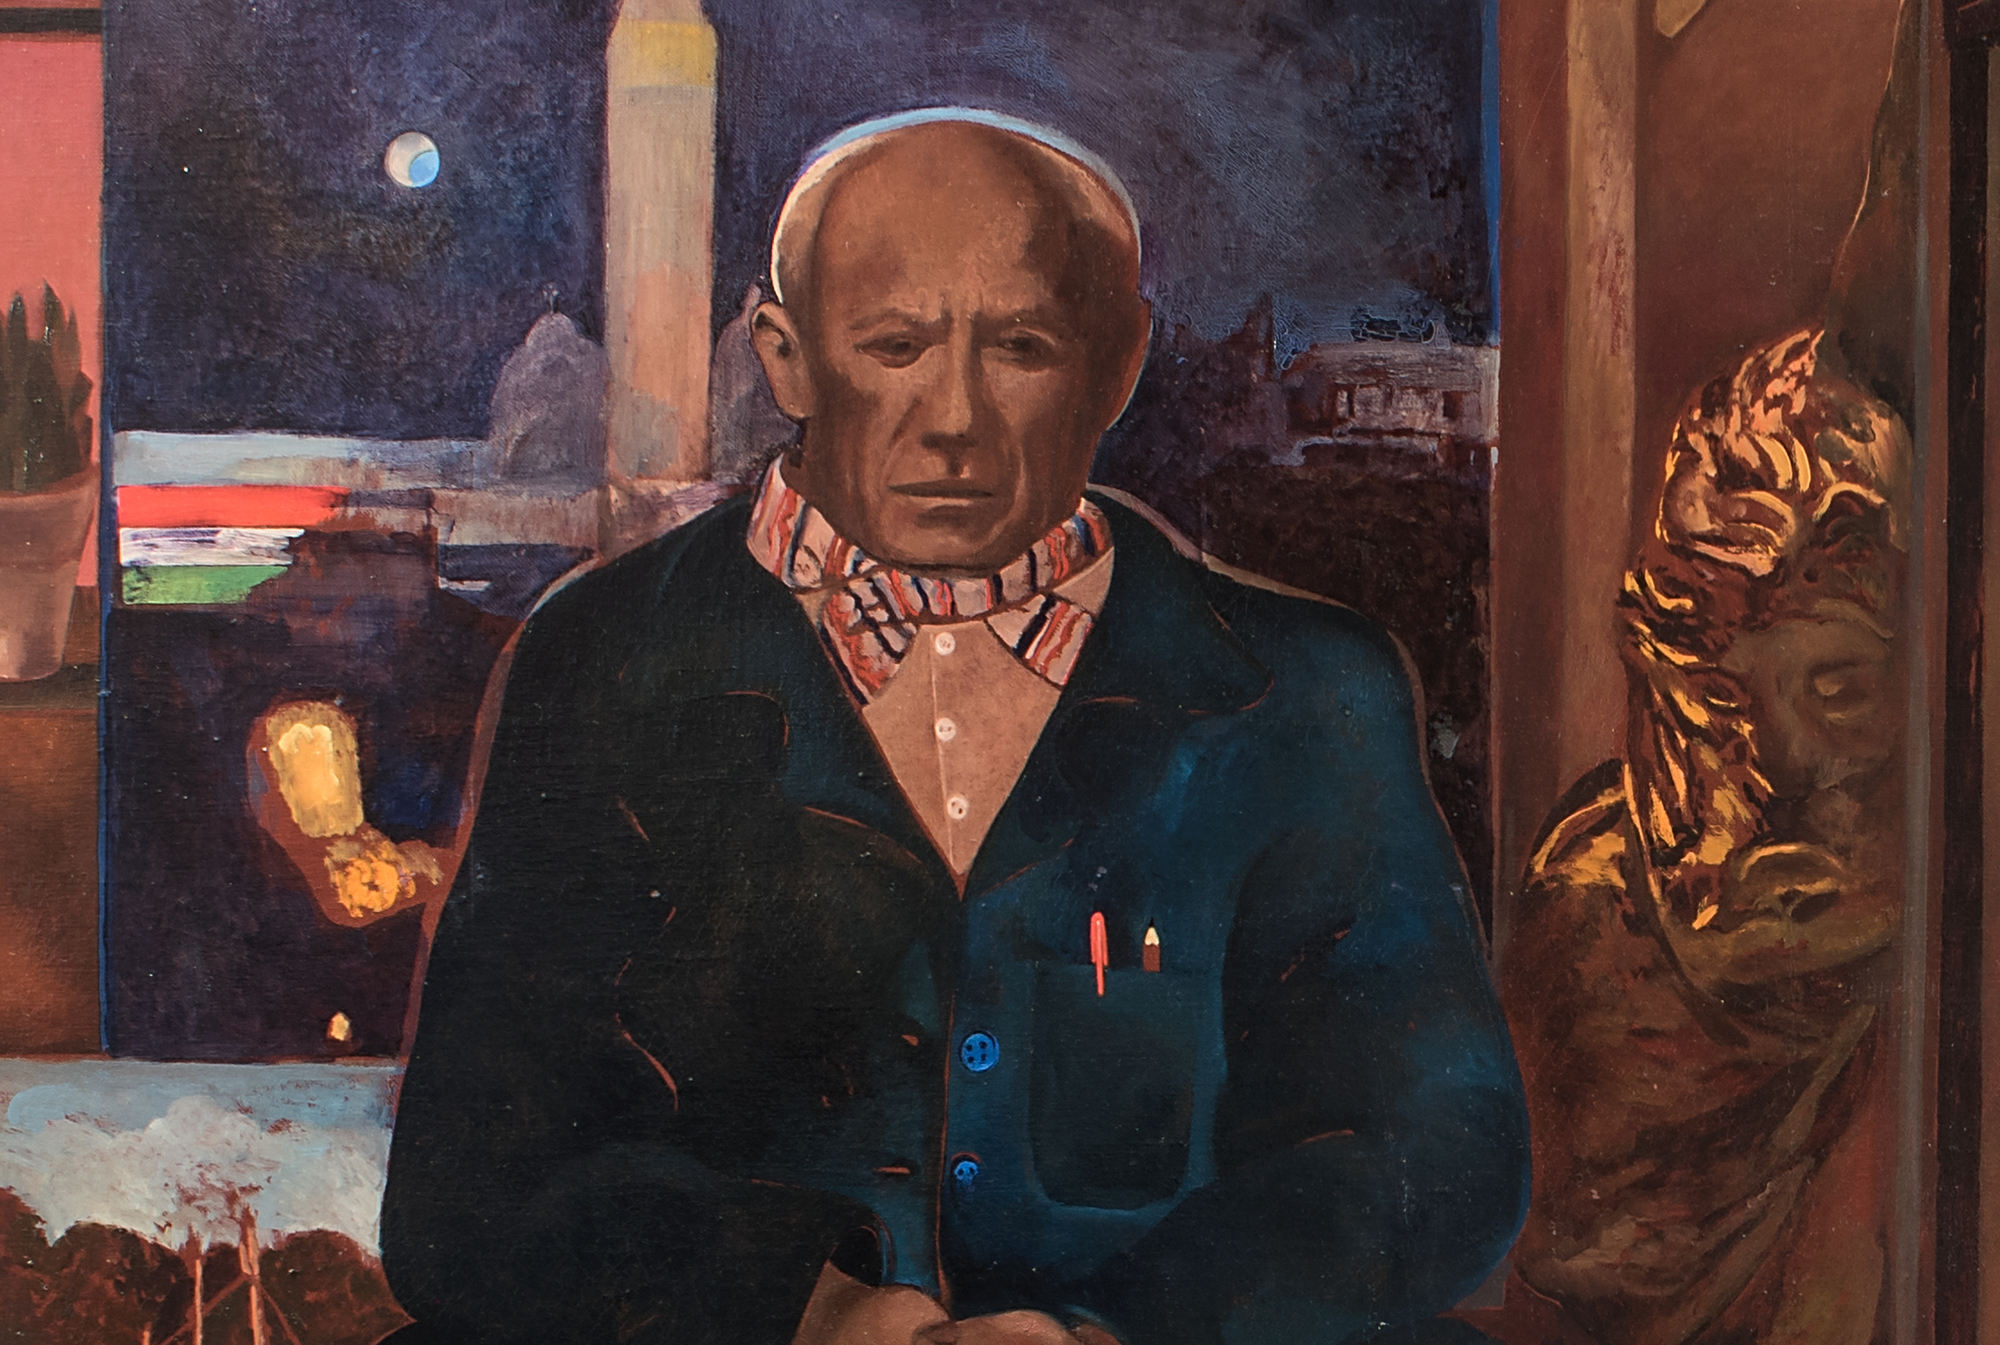 Pablo Picasso paints a portrait of his sitter Giorgio De Chirico in a room filled with classical antiquities, neoclassical sculptures and impressionist paintings. The artist dreams of his own glory, which is symbolized by the masterpieces in the room – the statue of Victory by Michelangelo, an Impressionist artwork leaning in a corner, and the painting behind the sitter that symbolizes human knowledge. Yet, this is all meant ironically. De Chirico only sits in for Pellegrini himself, who mocks his own fears and phobias, by sitting in a room in which every person and artwork in the painting have already achieved their glory. &lt;br&gt;&lt;br&gt;“Yes, irony is one of the elements of my painting. I make fun of myself and my neurotic fears and phobias and I turn the situation with ironic if not at times hilarious details. I placed a cat, for example, with phosphorescent eyes in a bucolic scene, or in the subject of Carnival I mix death, ridicule and joking.” (Antonio Monda, “Interview with Max Pellegrini,” in Max Pellegrini, ed. Danilo Eccher, 2014